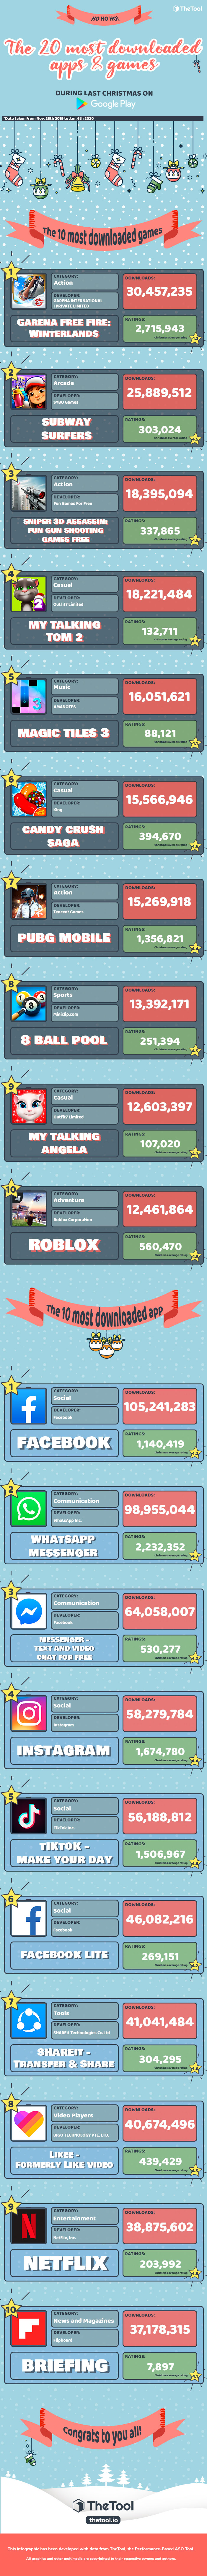 The 20 Most Downloaded Apps Games On Google Play During Christmas